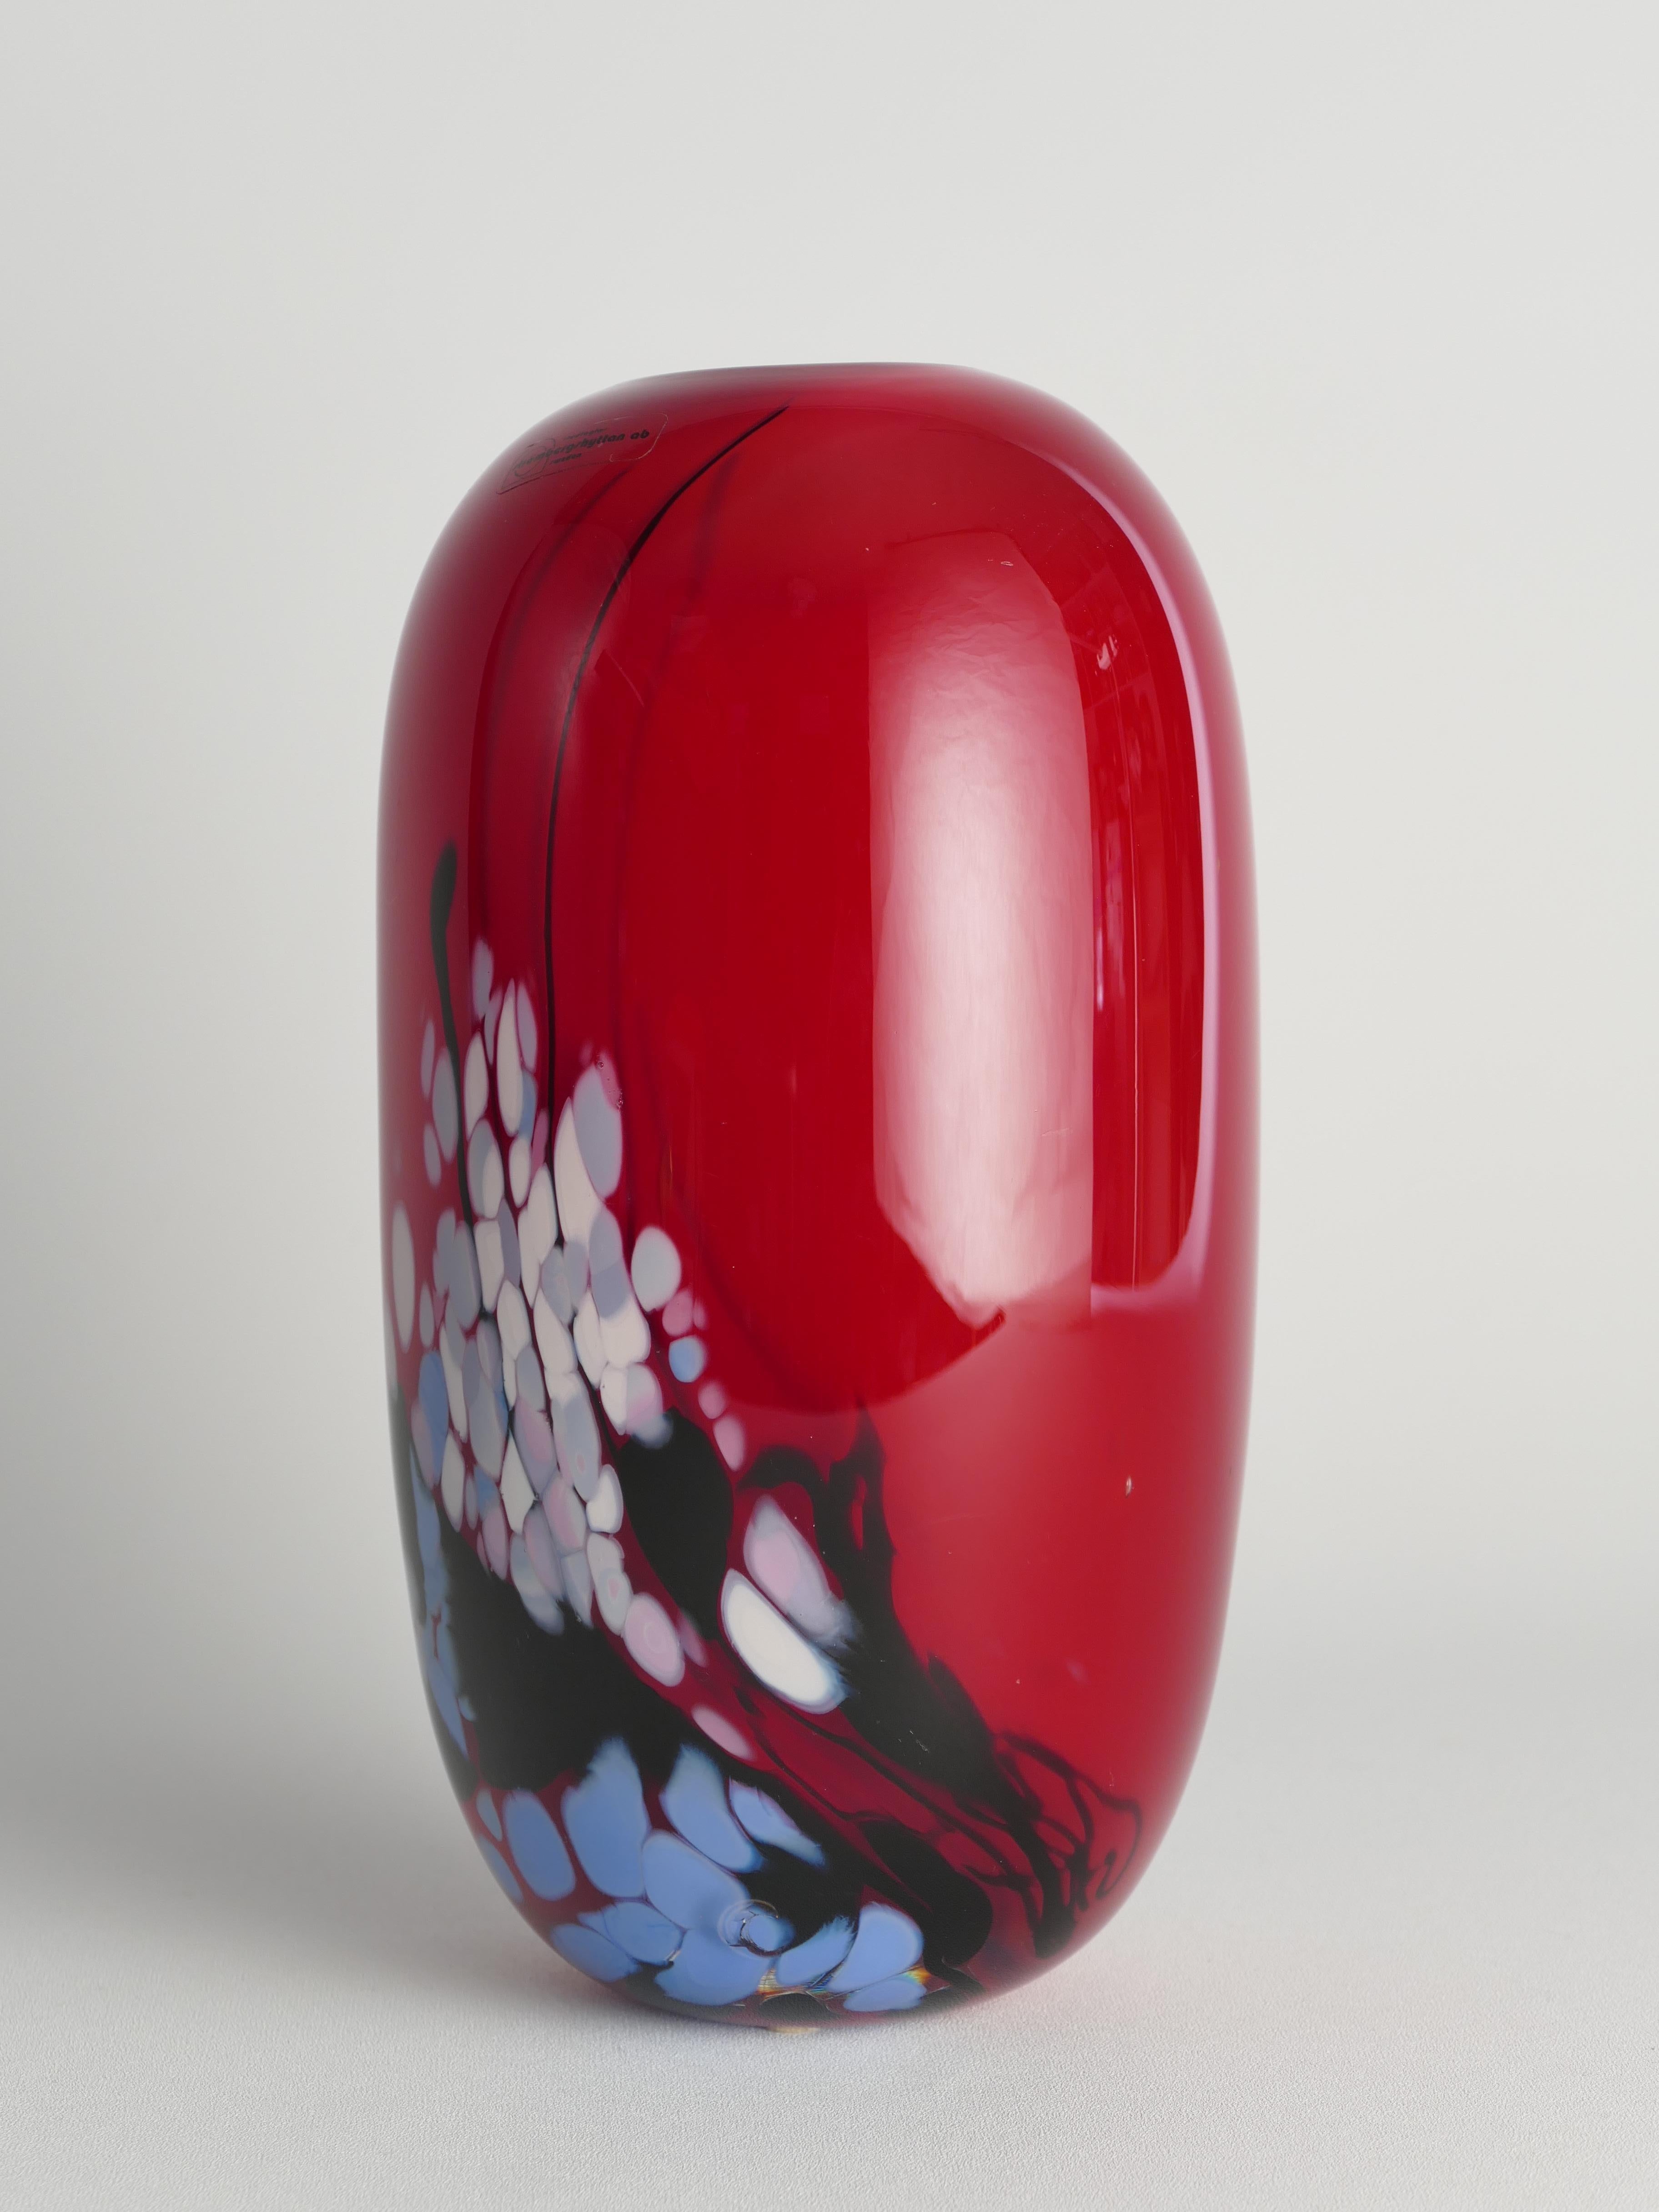 Late 20th Century Unique Cherry Red Art Glass Vase by Mikael Axenbrant, Sweden 1990 For Sale